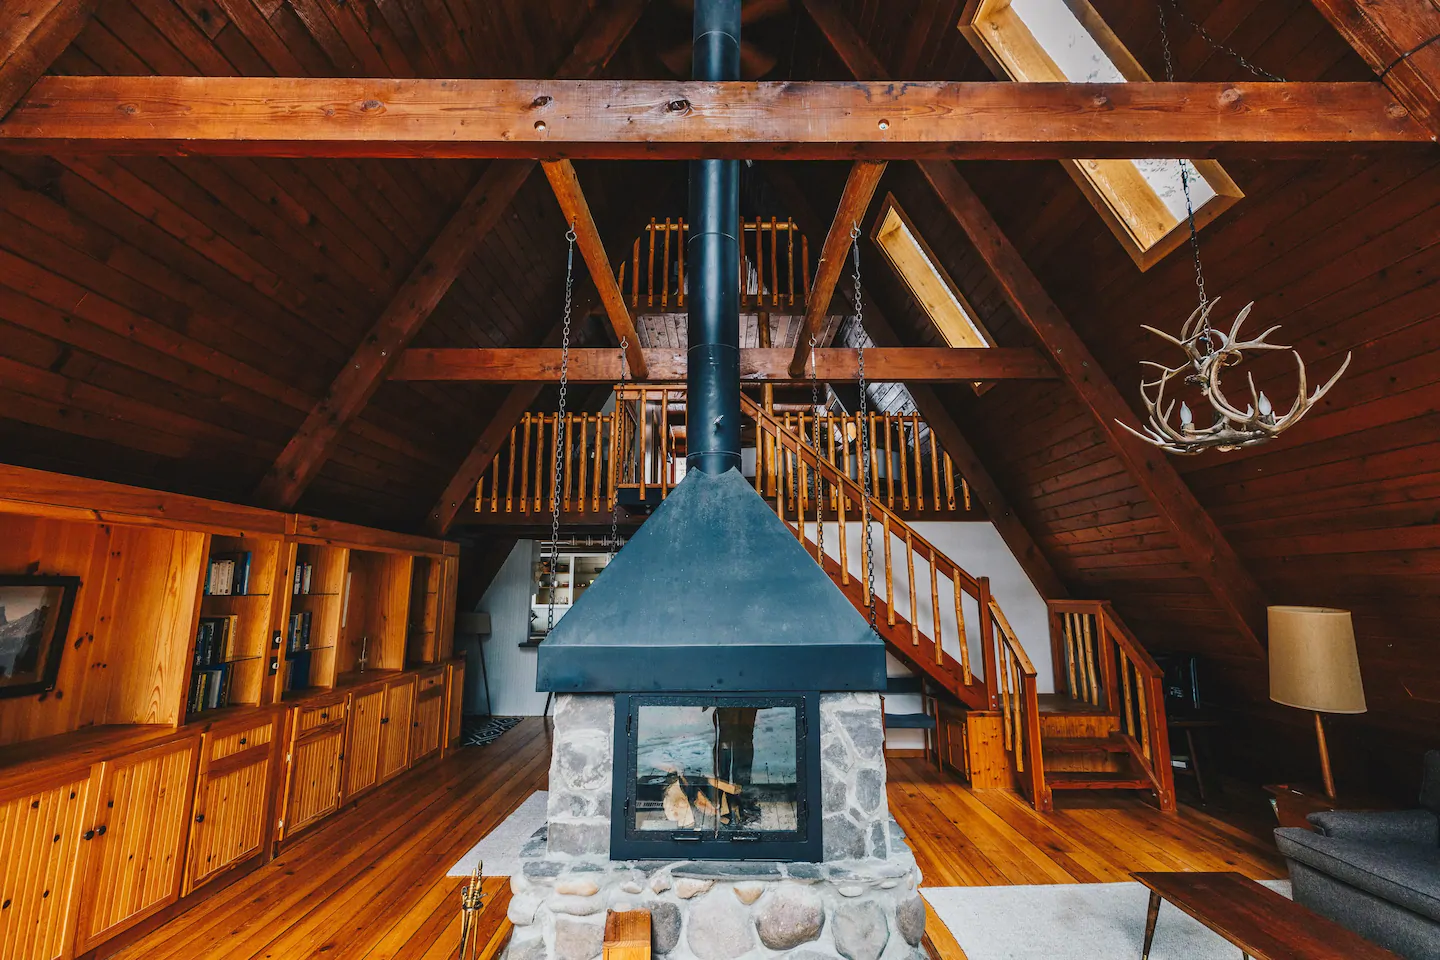 This Cozy & Private A-Frame is one of the best cabins in the Pacific Northwest.